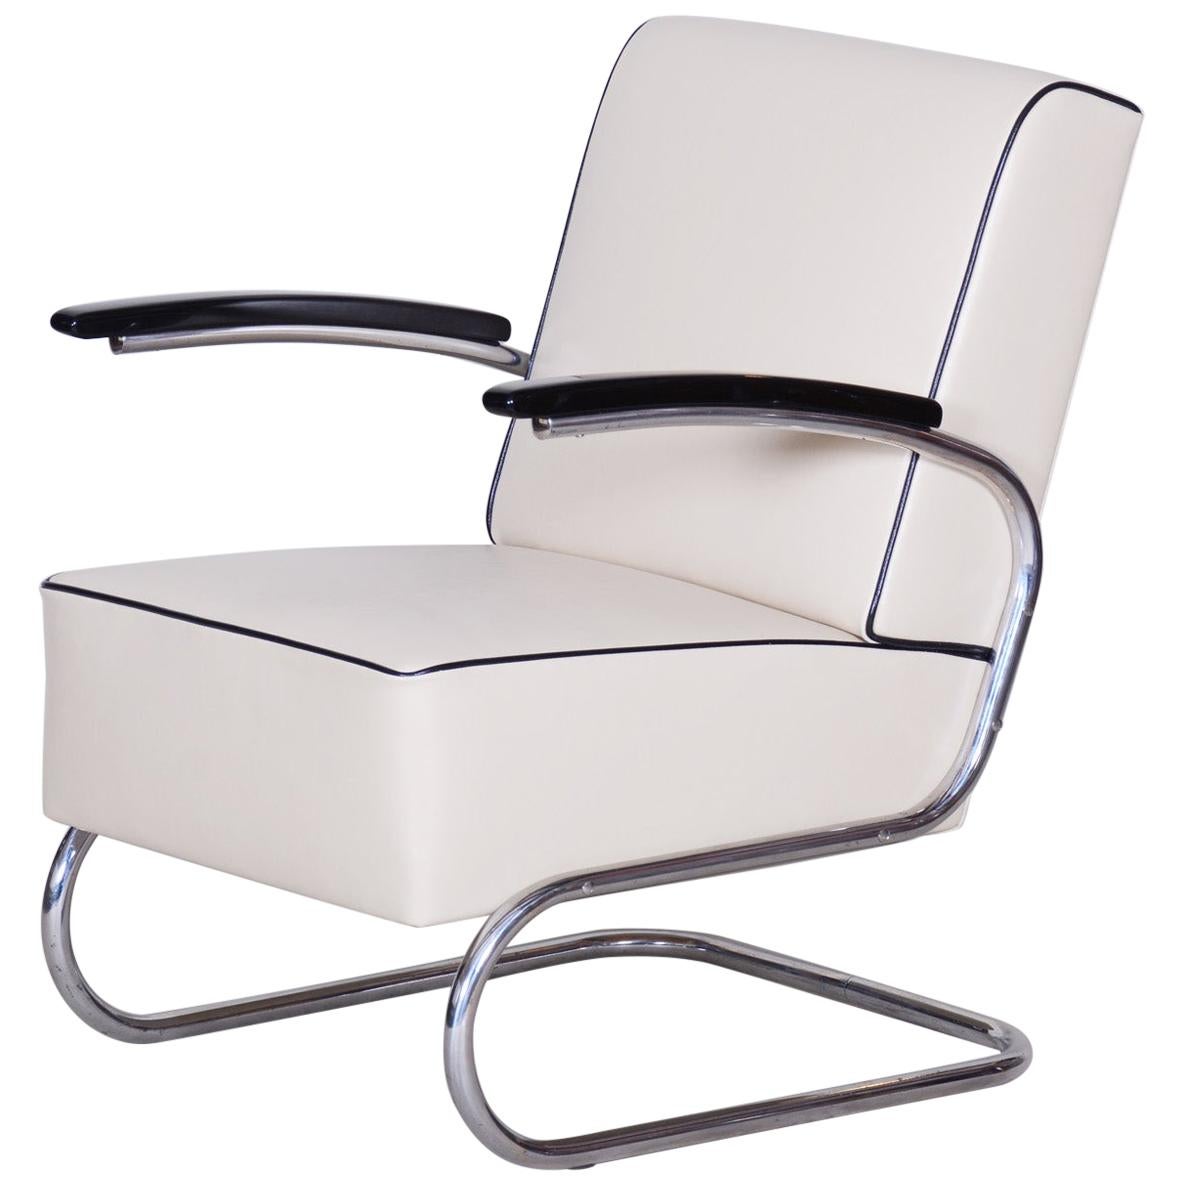 Tubular Steel Cantilever Armchair in Art Deco, Chrome, New Ivory Leather, 1930s For Sale